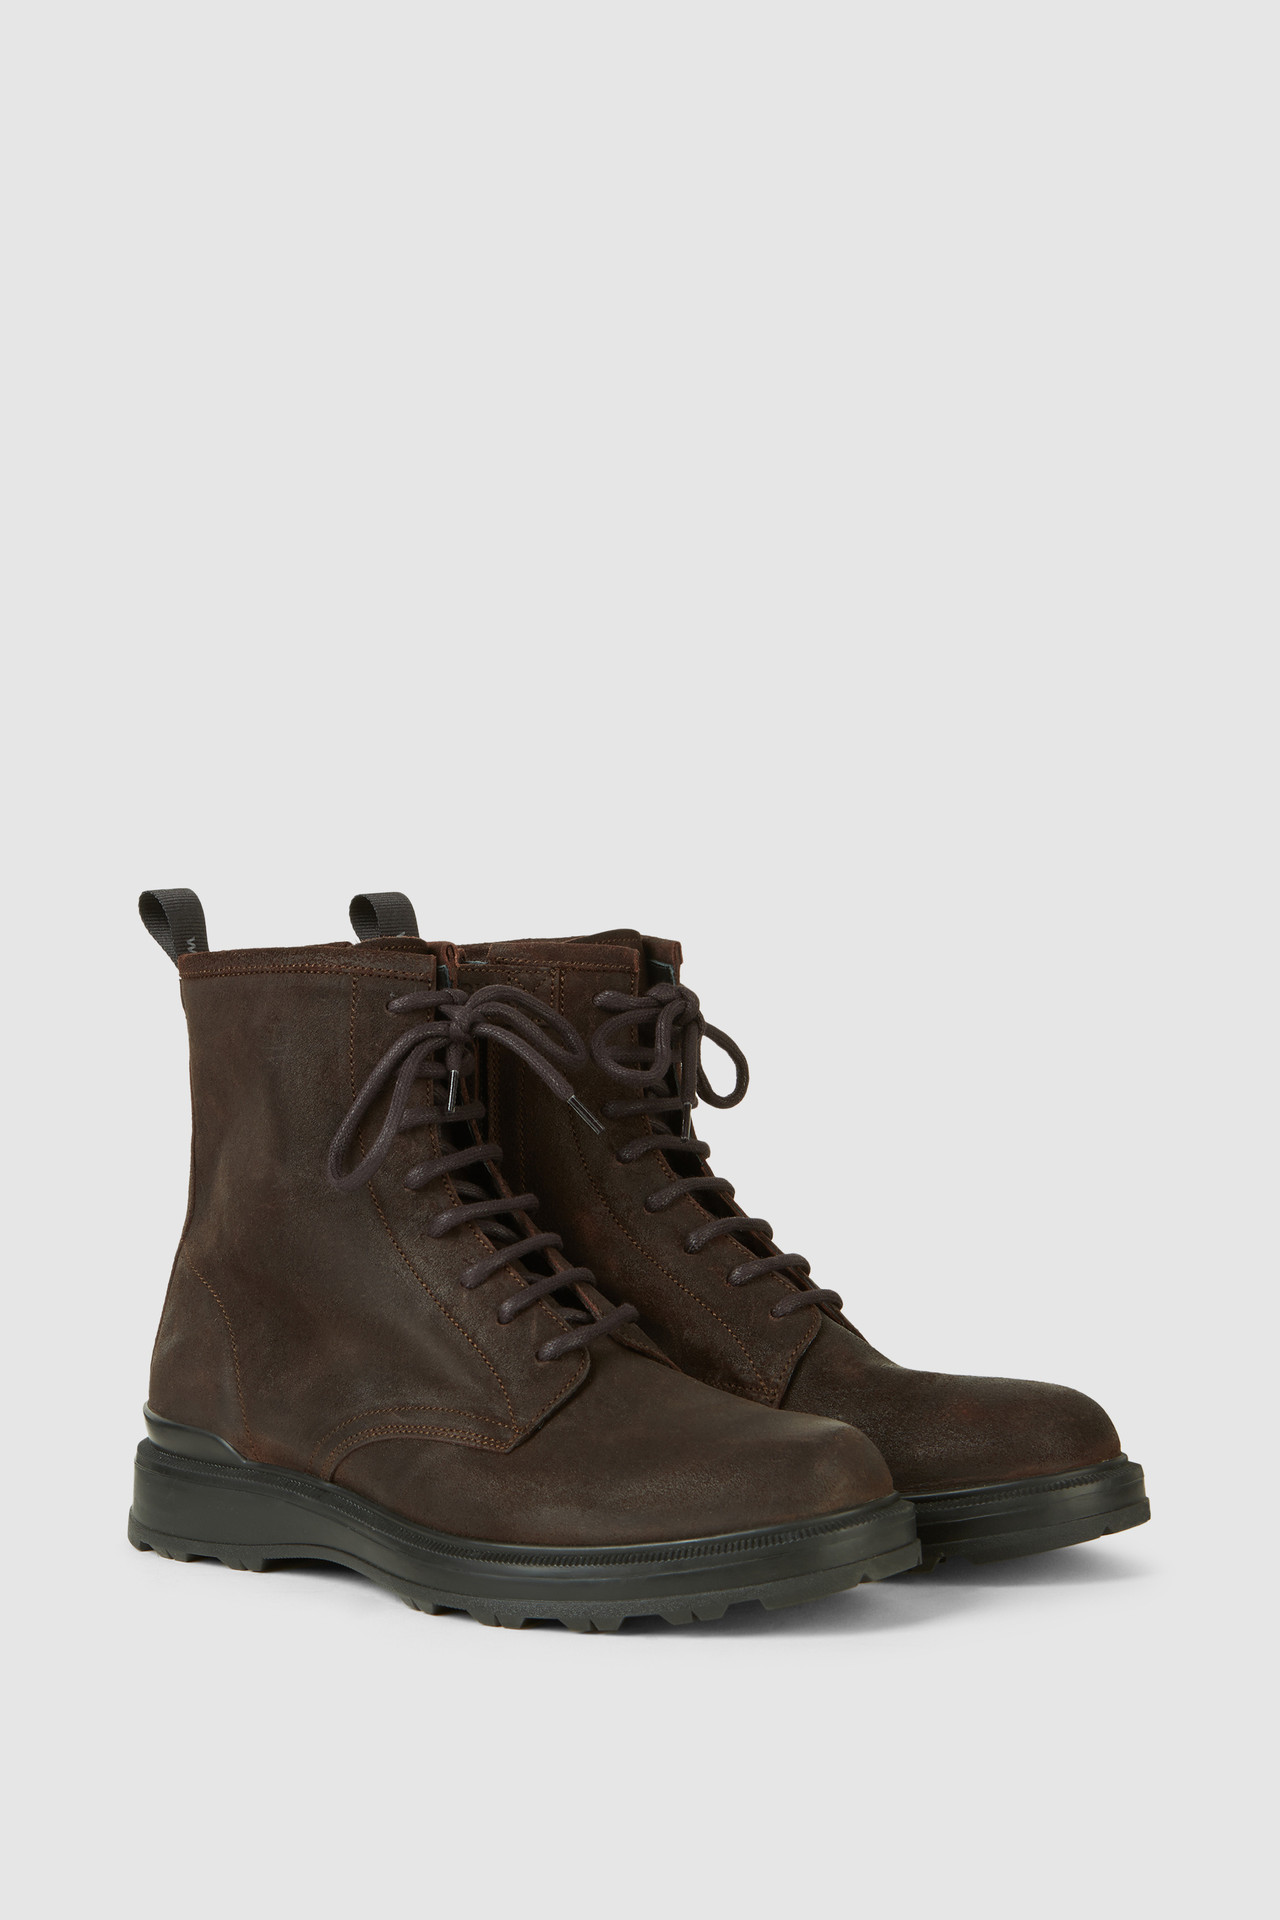 woolrich leather boots